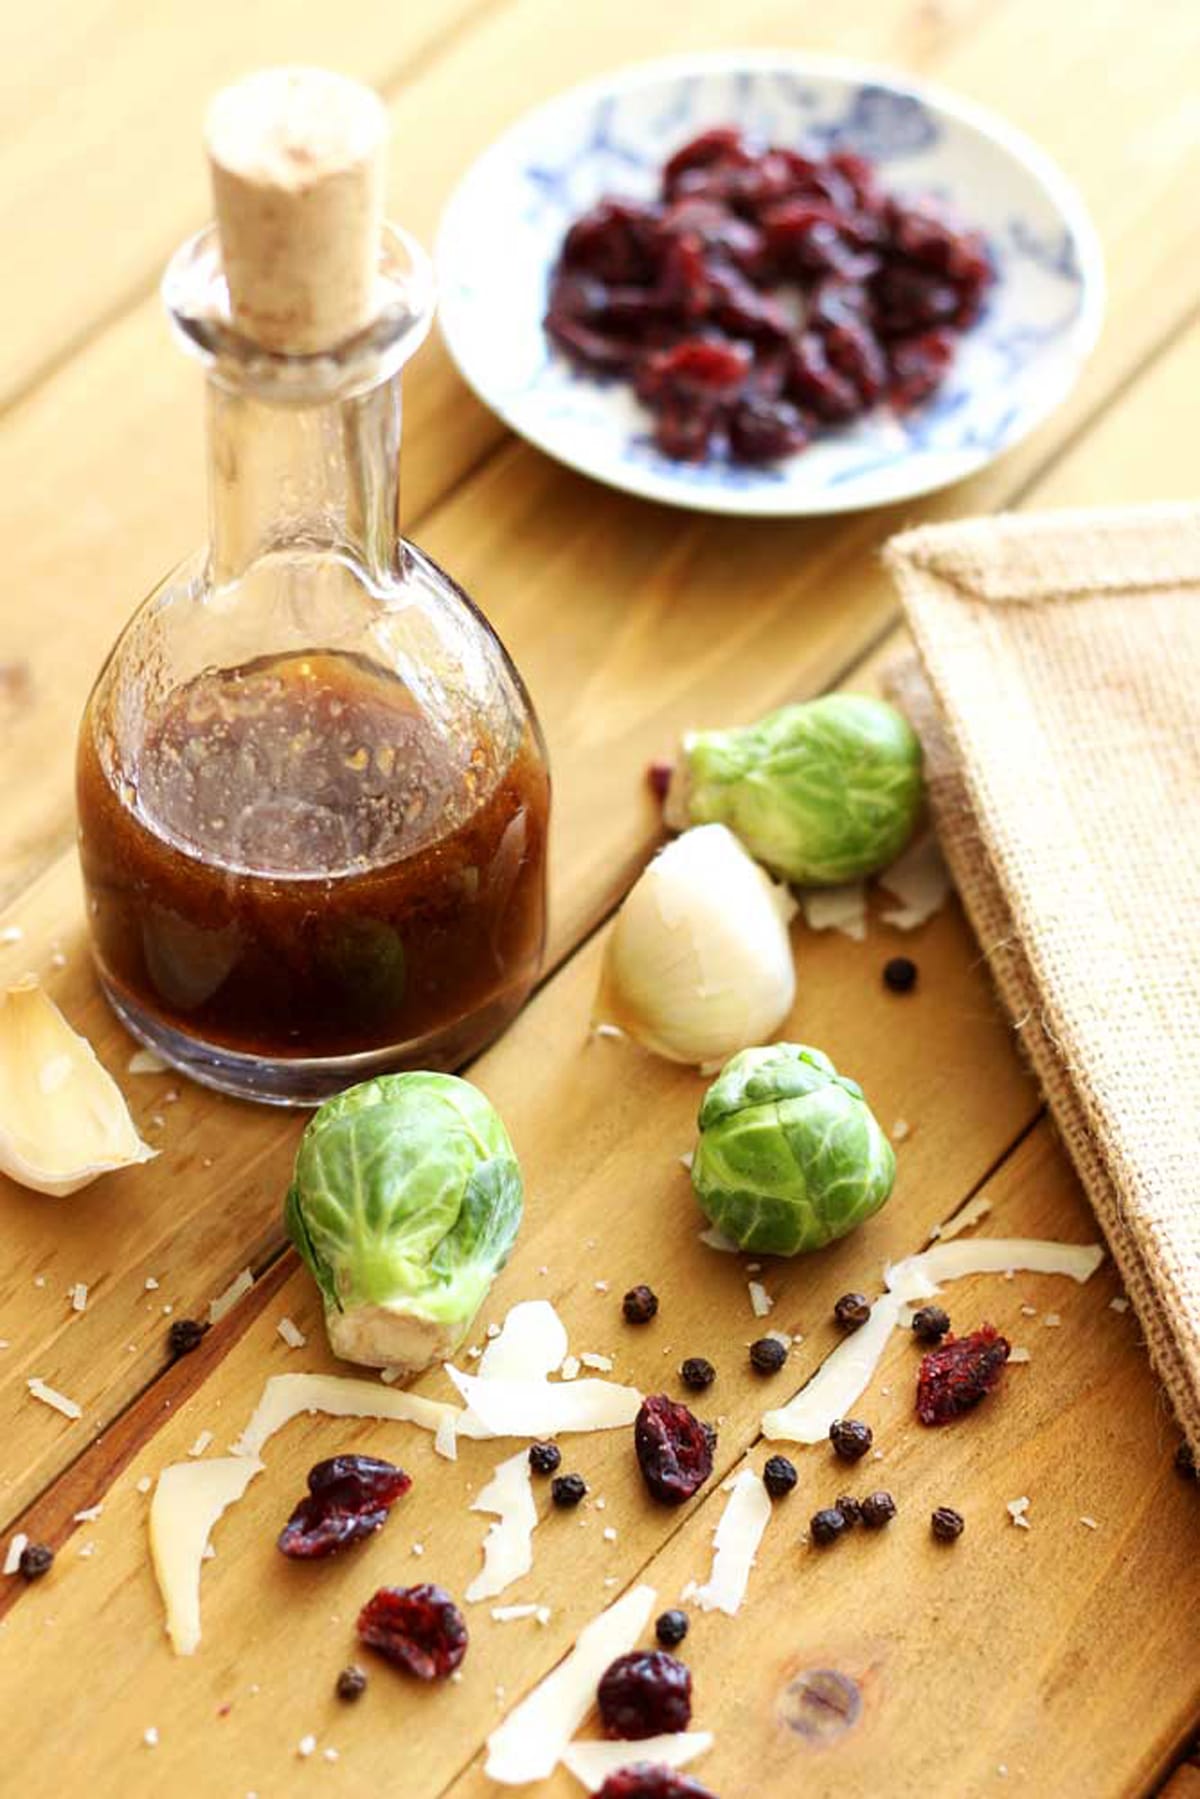 Bottle of vinaigrette dressing sitting on wooden table, brussels sprouts, garlic and cranberries on table.